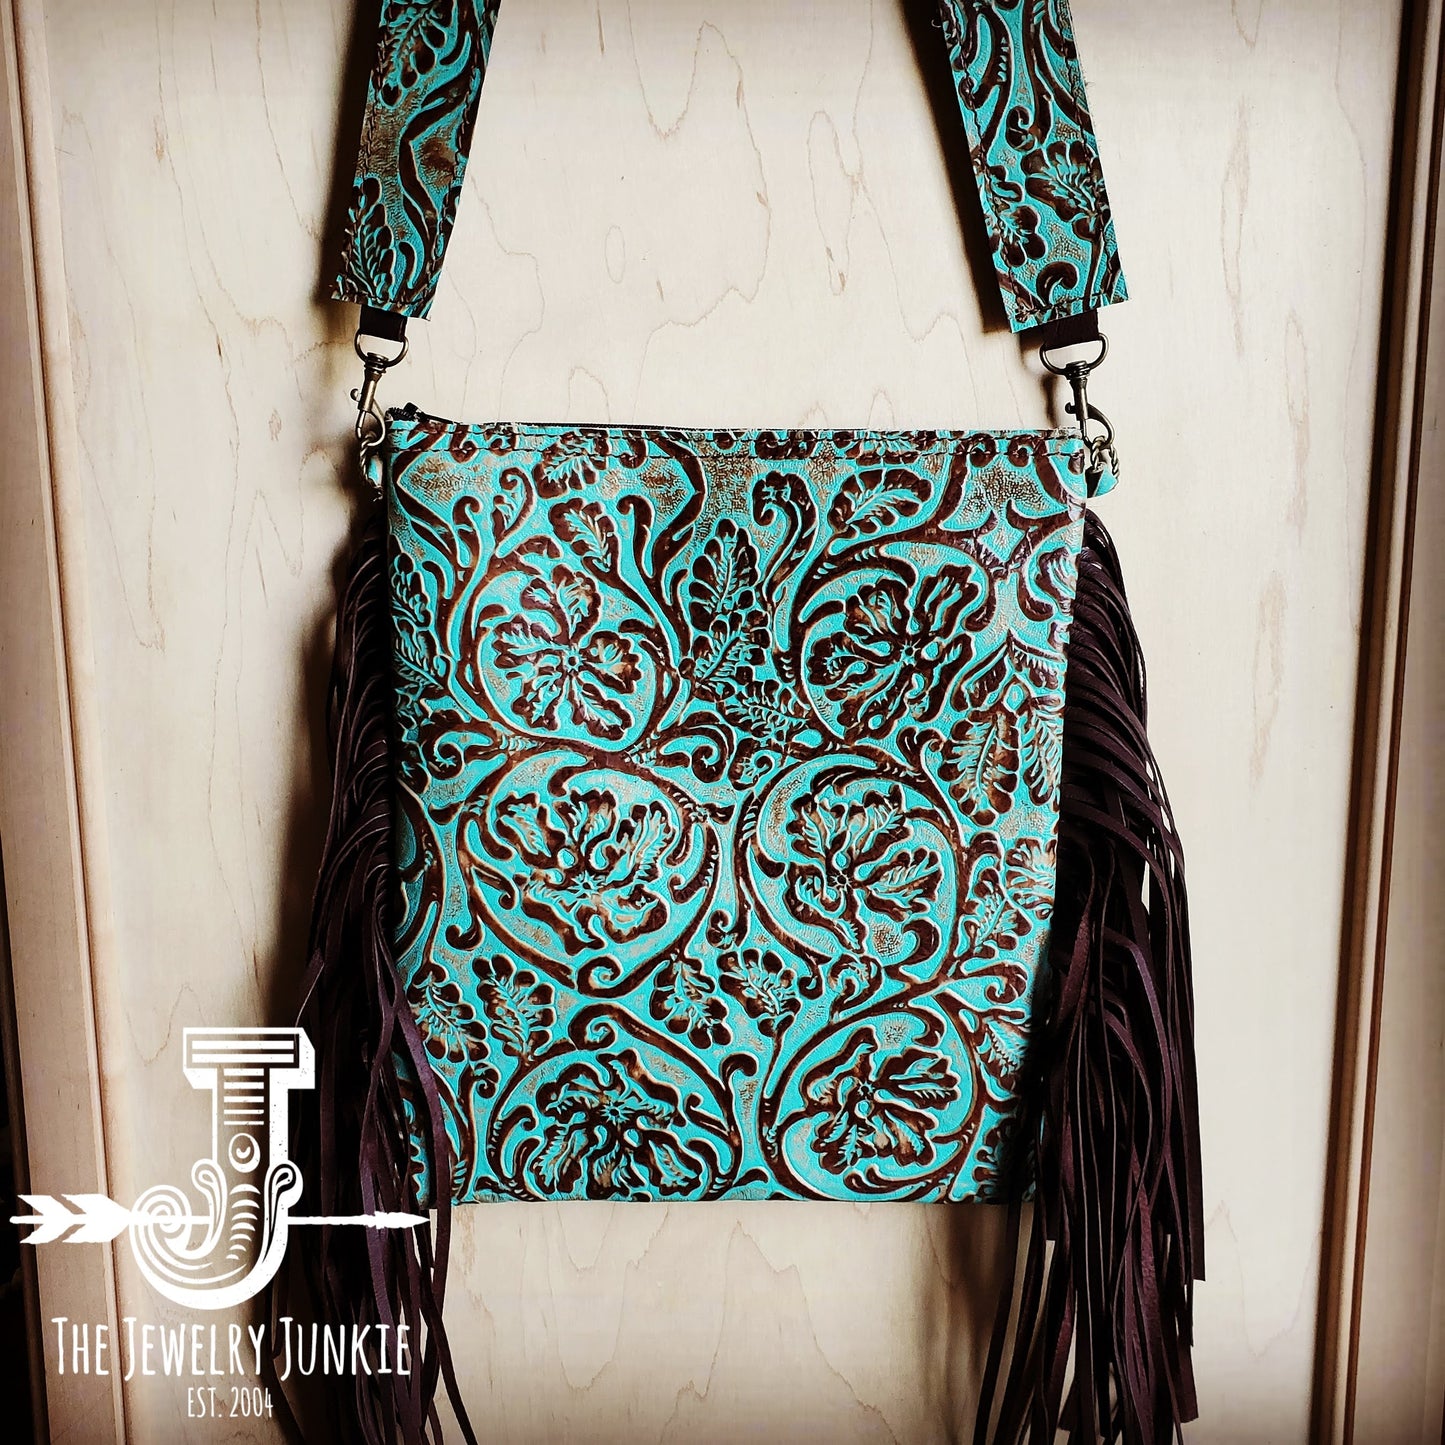 **Embossed Leather Crossbody Strap in Cowboy Turquoise 400j